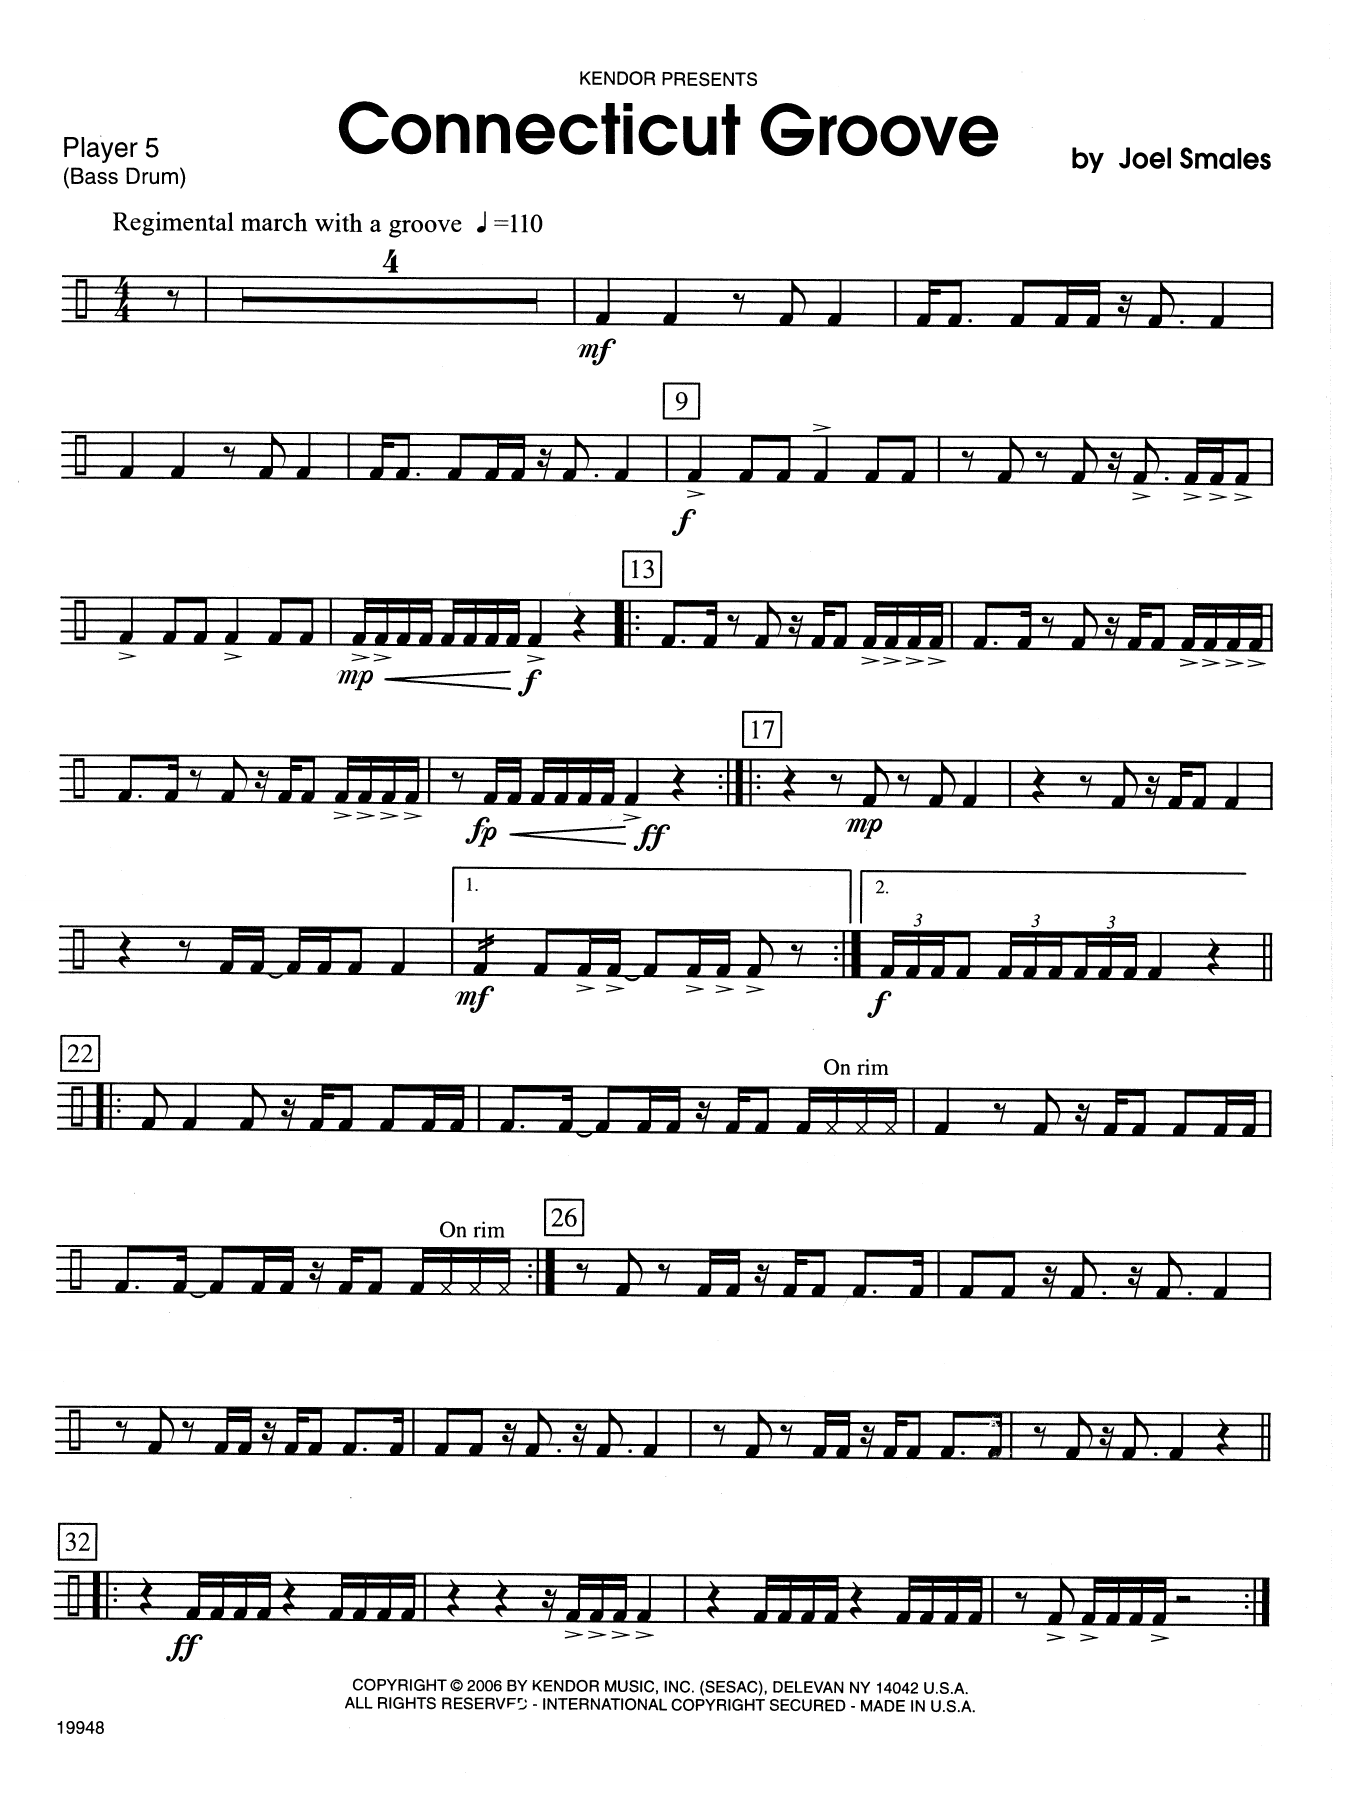 Download Joel Smales Connecticut Groove - Percussion 5 Sheet Music